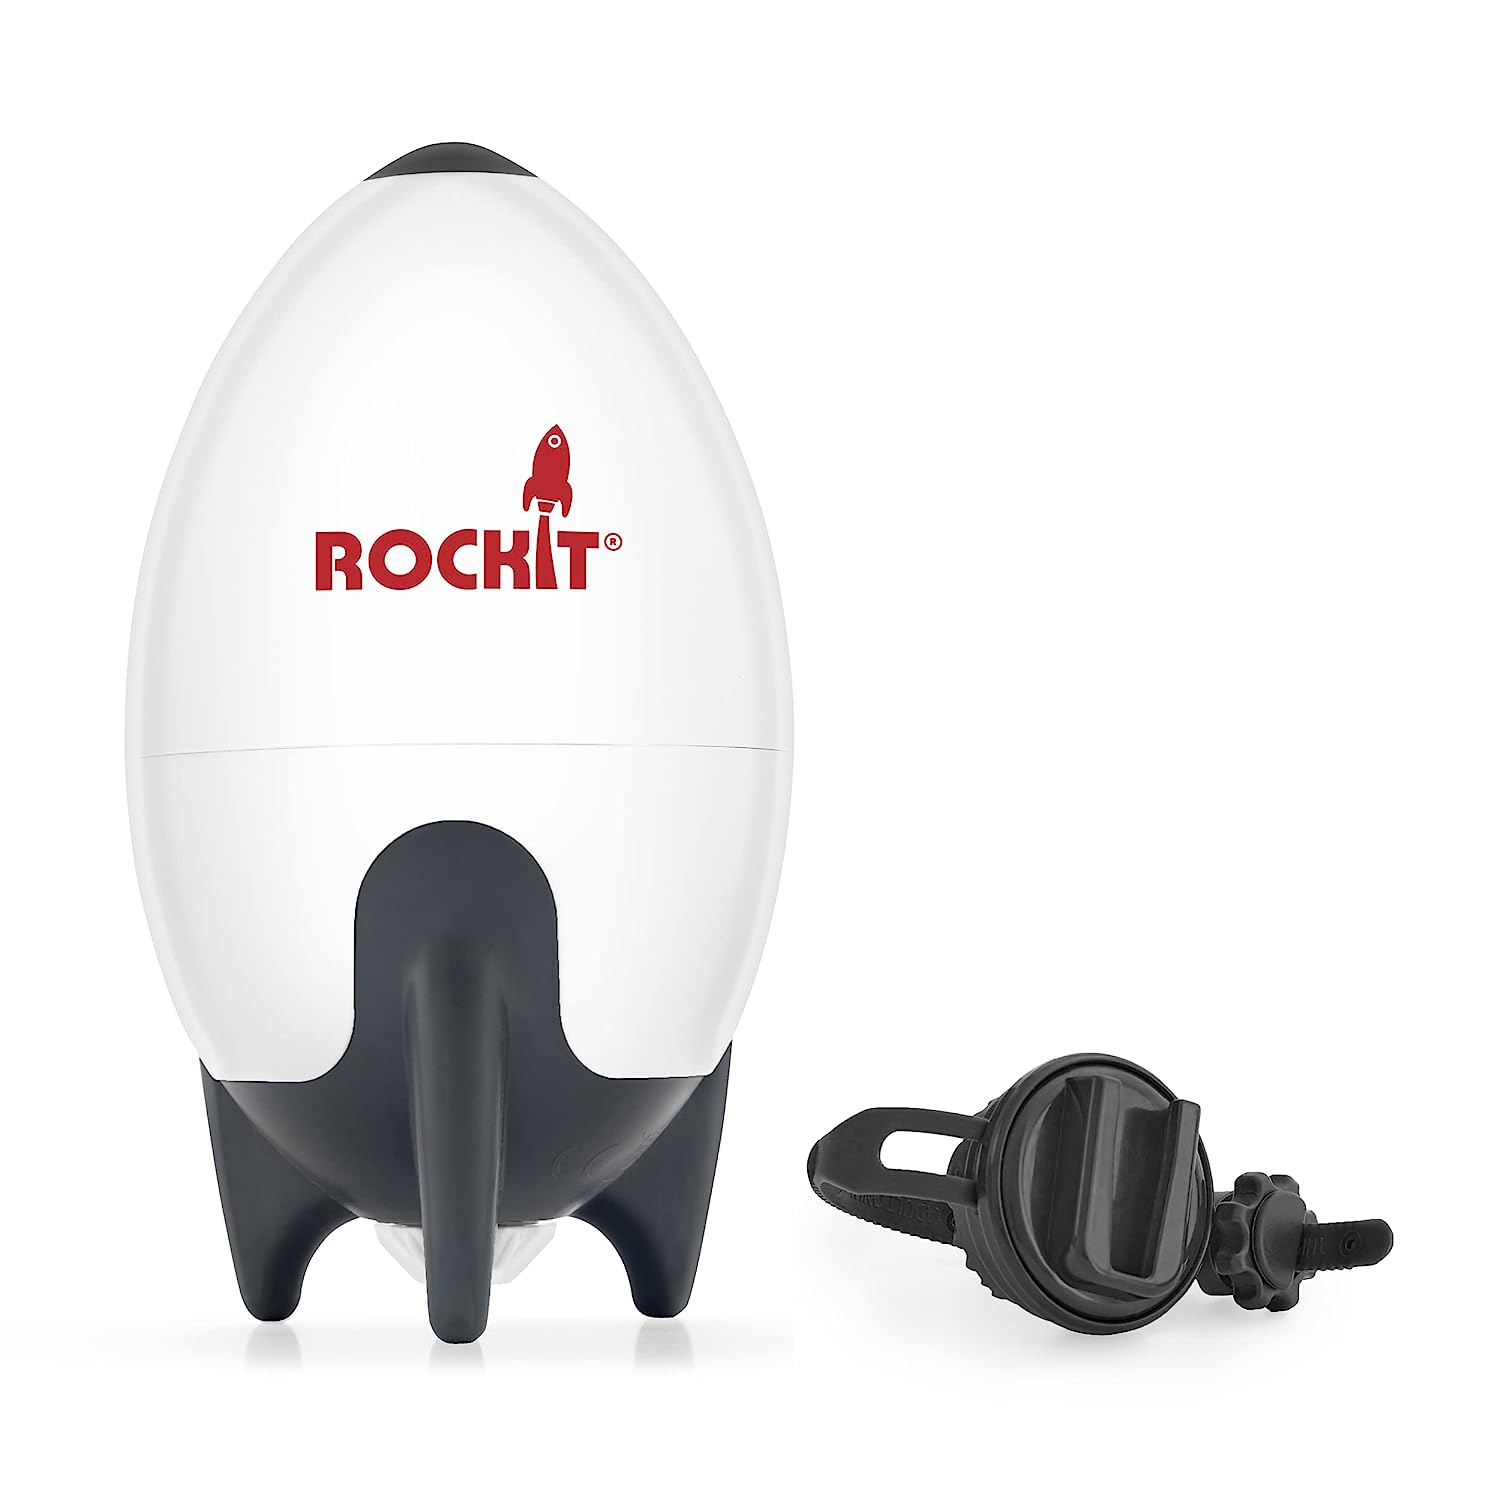 Stroller Accessories Rockit ITEM 01 Rocking device for strollers